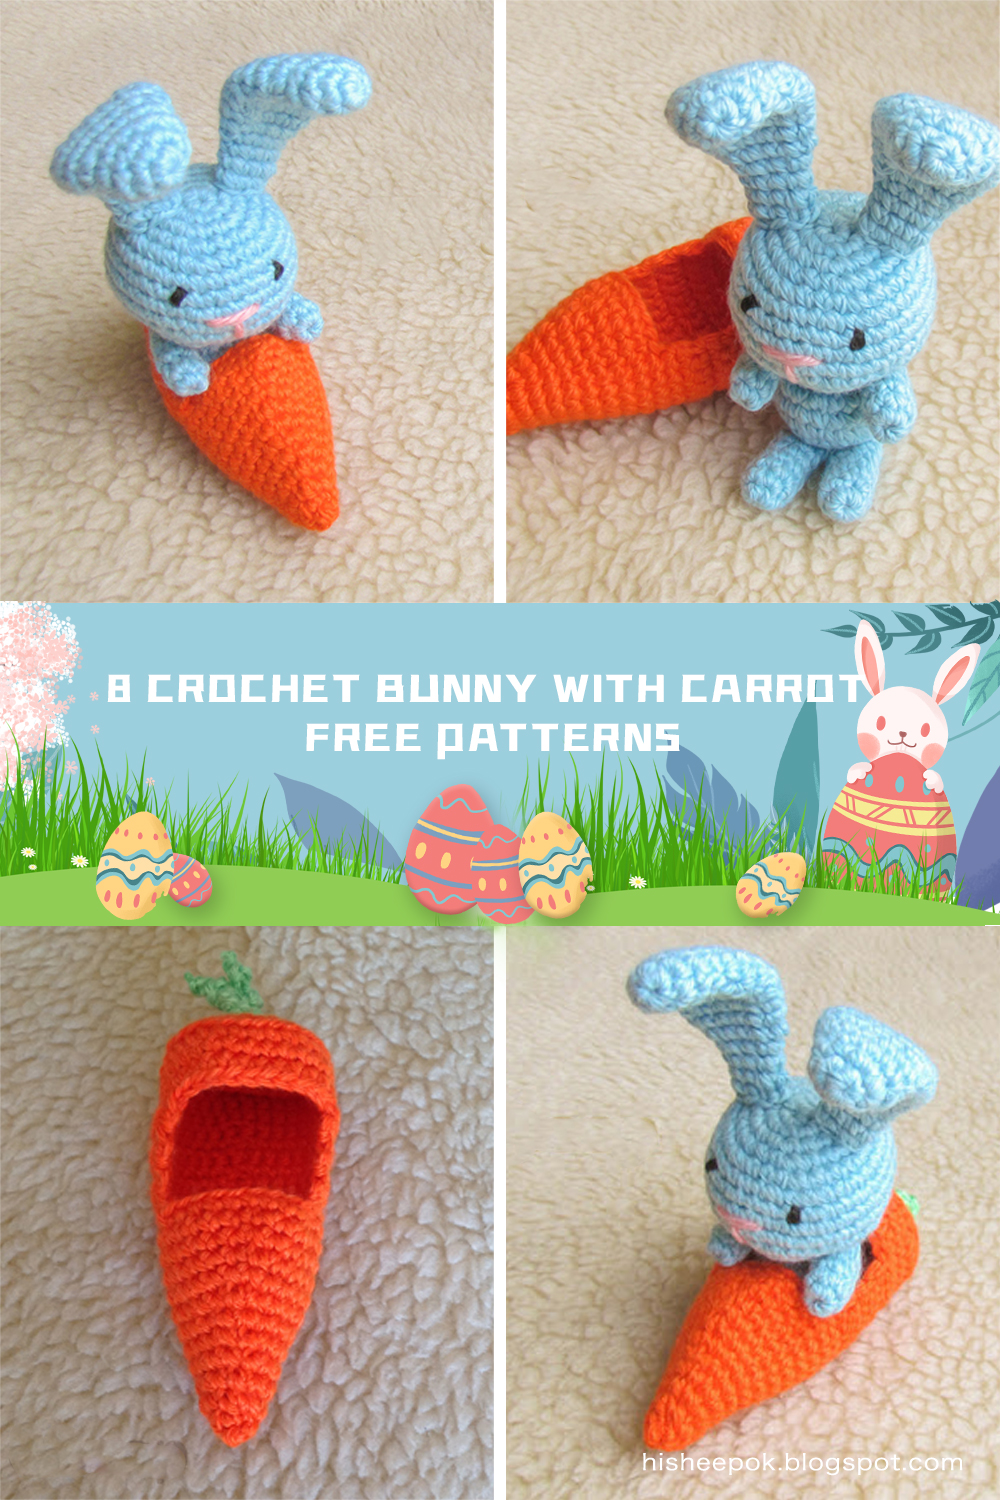 8 Crochet Bunny with Carrot FREE Patterns